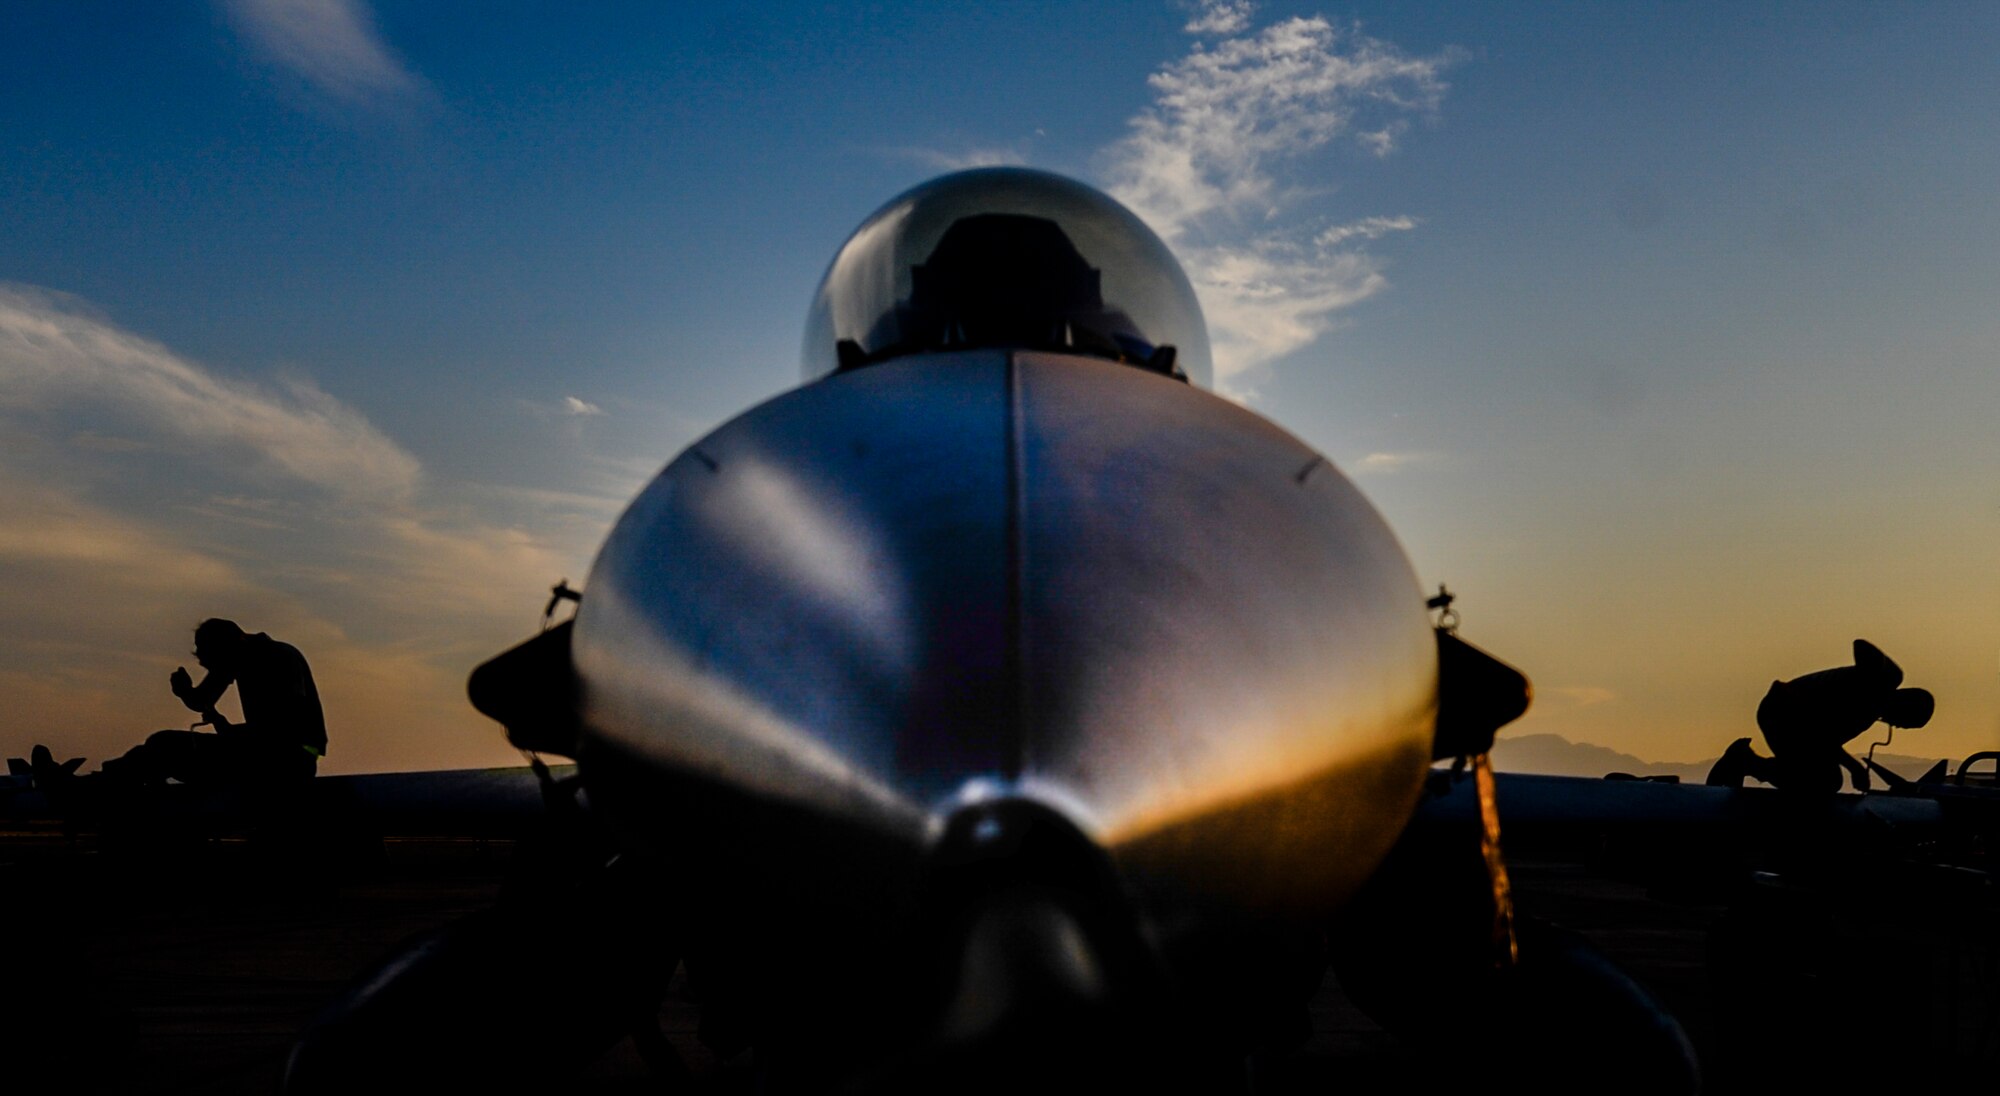 Maintainers assigned to the 79th Fighter Squadron, Shaw Air Force Base, S.C., work on an F-16CJ during Red Flag 16-3 at Nellis Air Force Base, Nev., July 25, 2016. Red Flag provides a series of intense air-to-air scenarios for aircrew and ground personnel which will increase their combat readiness and effectiveness for future real world missions. (U.S. Air Force photo by Airman 1st Class Kevin Tanenbaum/Released)